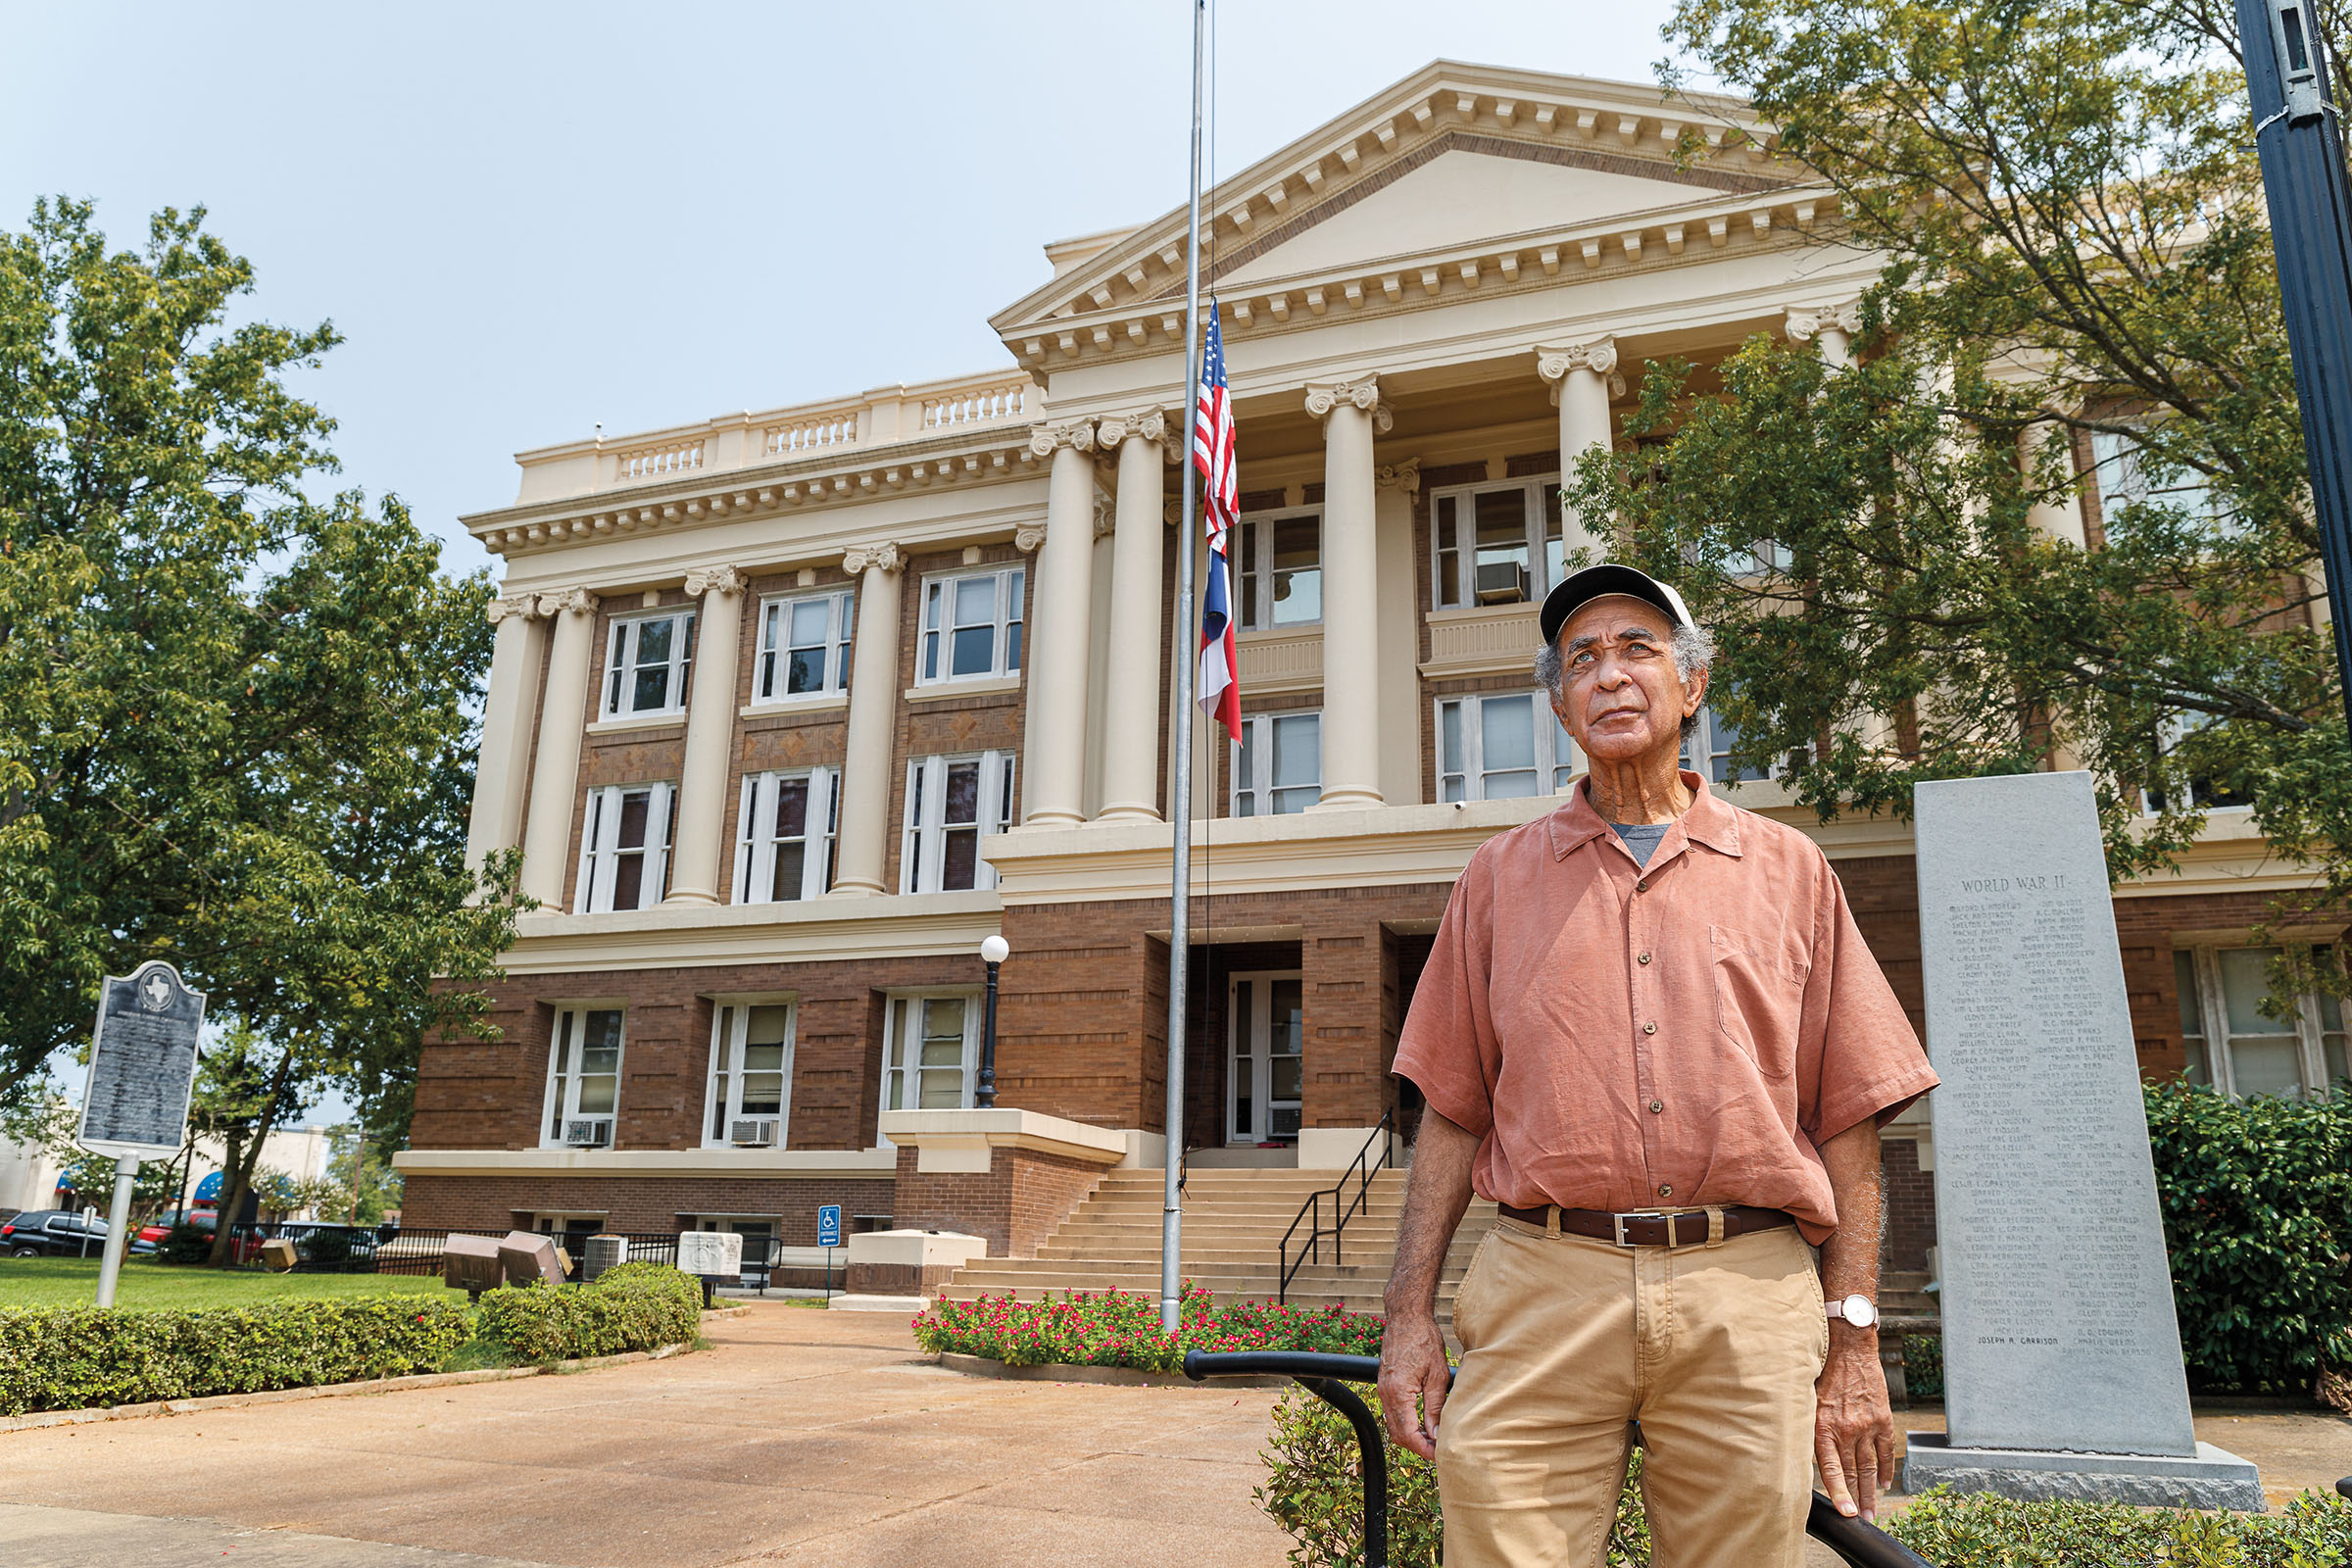 A man in a button-down shirt stands in front of a courthouse with a Texas and United States flag